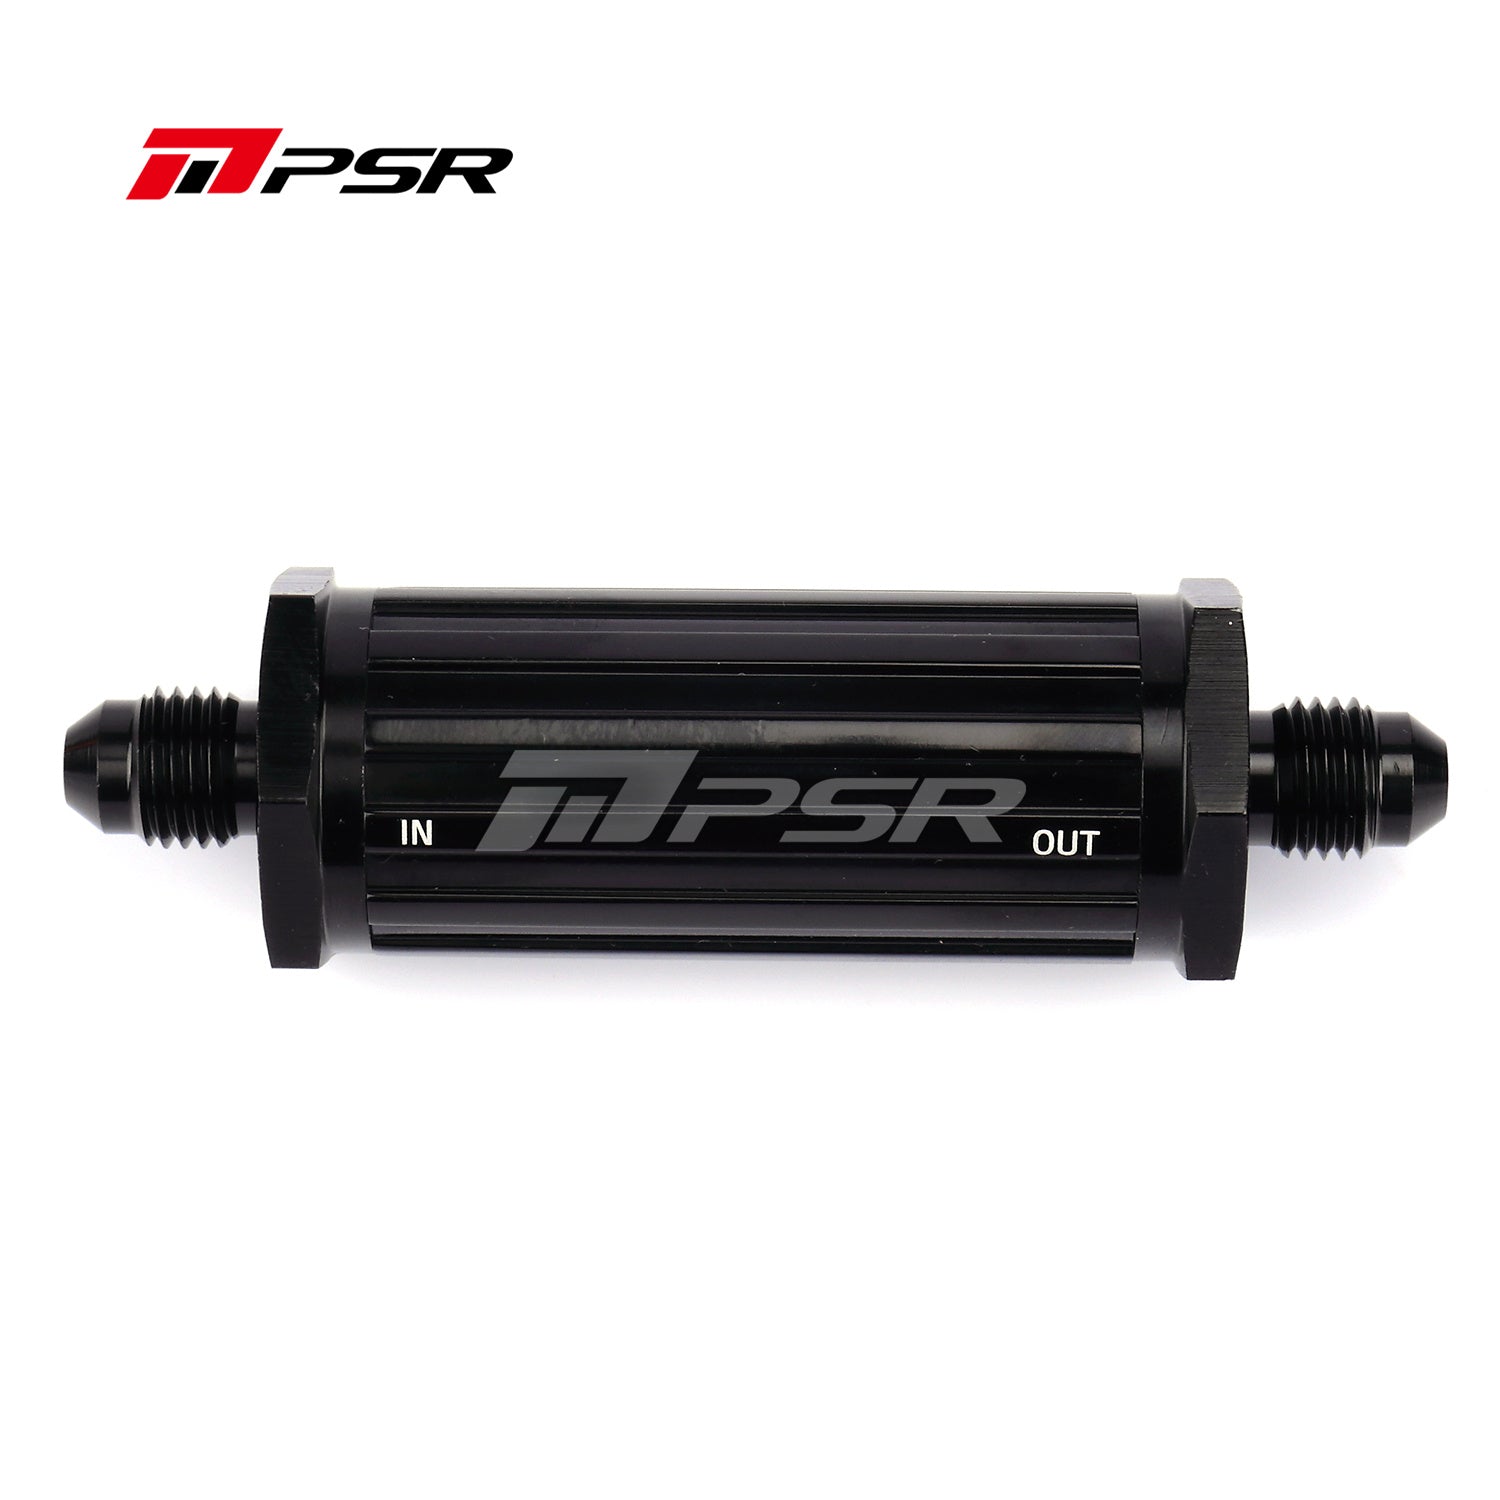 PSR In Line Oil Filter, Fitting Size -4AN, 80 Micron Filter inside